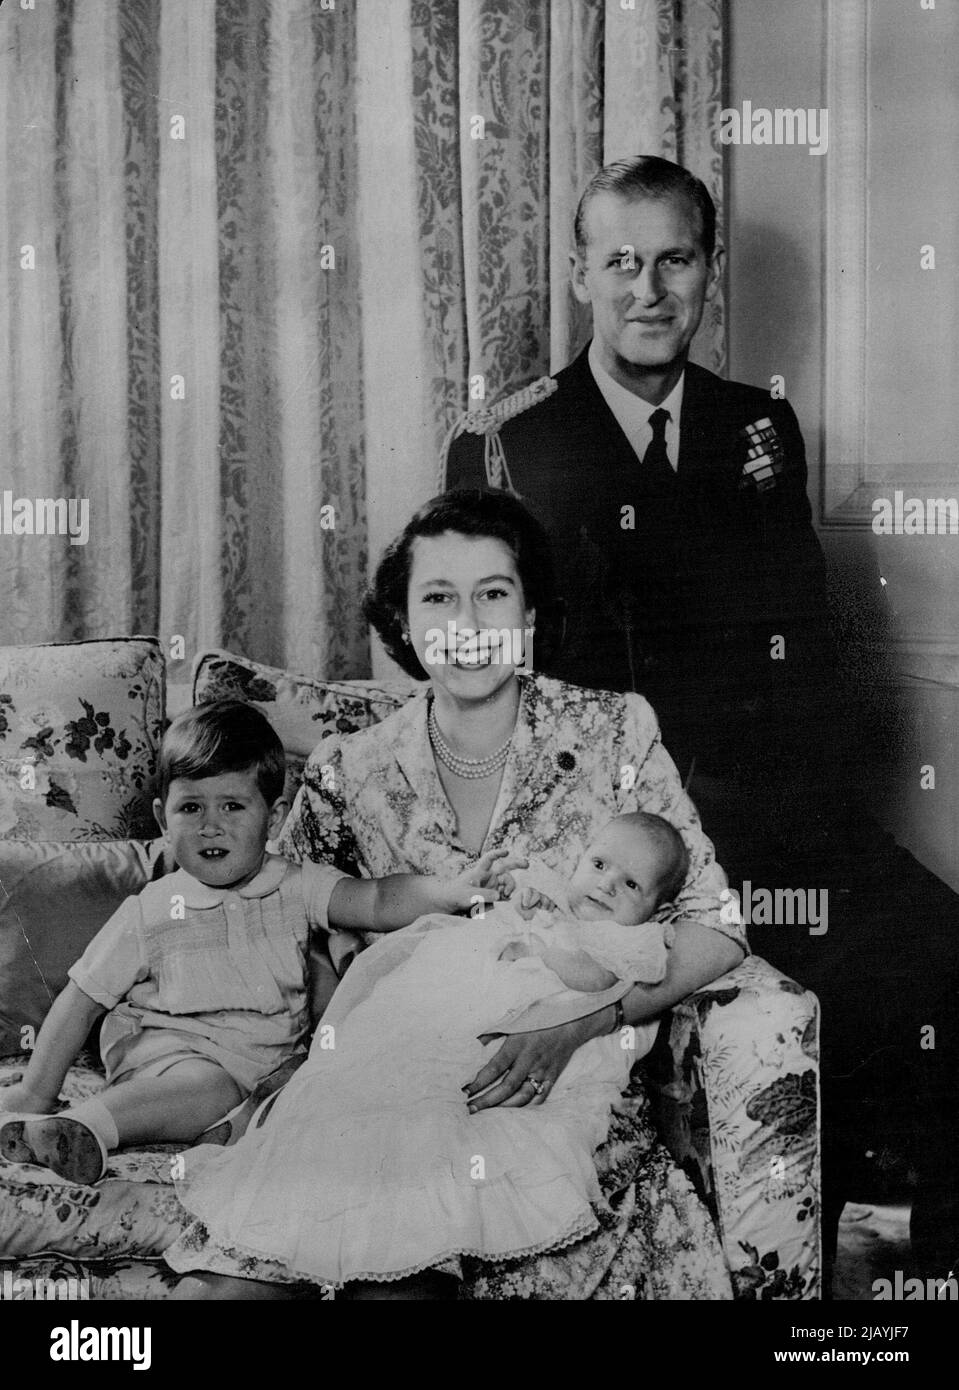 Princess's Family - New Picture -- This picture released today, Jan. 9, from Clarence House, London shows Princess Elizabeth, the duke of Edinburgh and their children, Prince Charles and Princess Anne, The Prince, who is reaching out to his baby sister, was born on 14 Nov. 1948: The little Princess will be five months old on 15 Jan. Princess Elizabeth, now in Malta, is expected back from Malta on Jan. 20. The Duke of Edinburgh commands the 1430-ton frigate magpie. January 30, 1951. (Photo by United Press Photo). Stock Photo